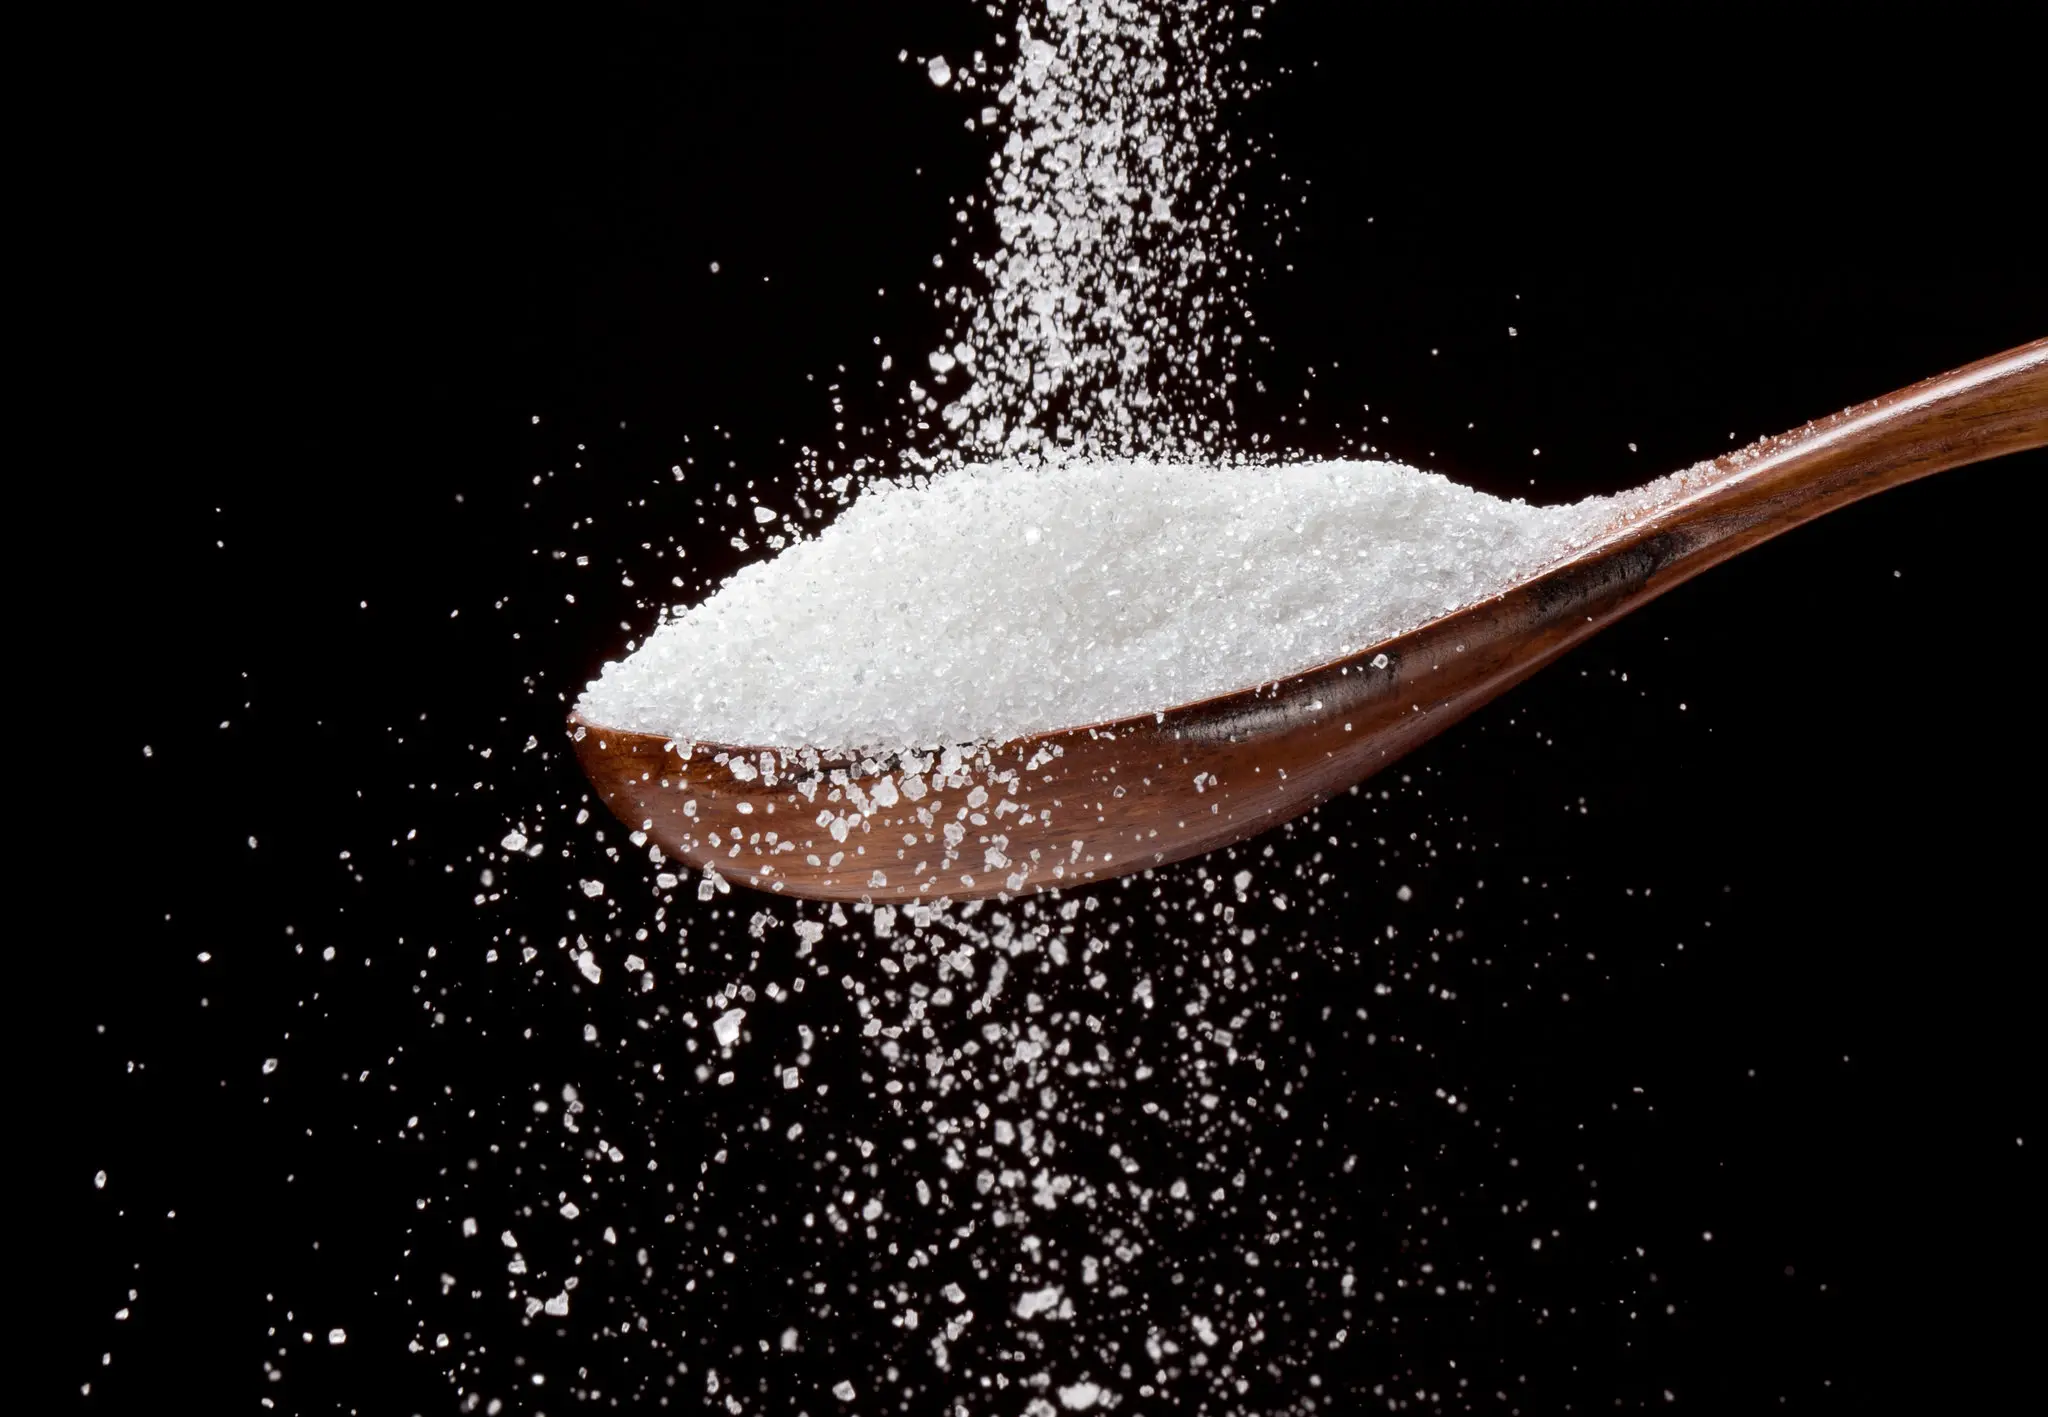 image of granulated sugar pouring onto a wooden spoon against a black background